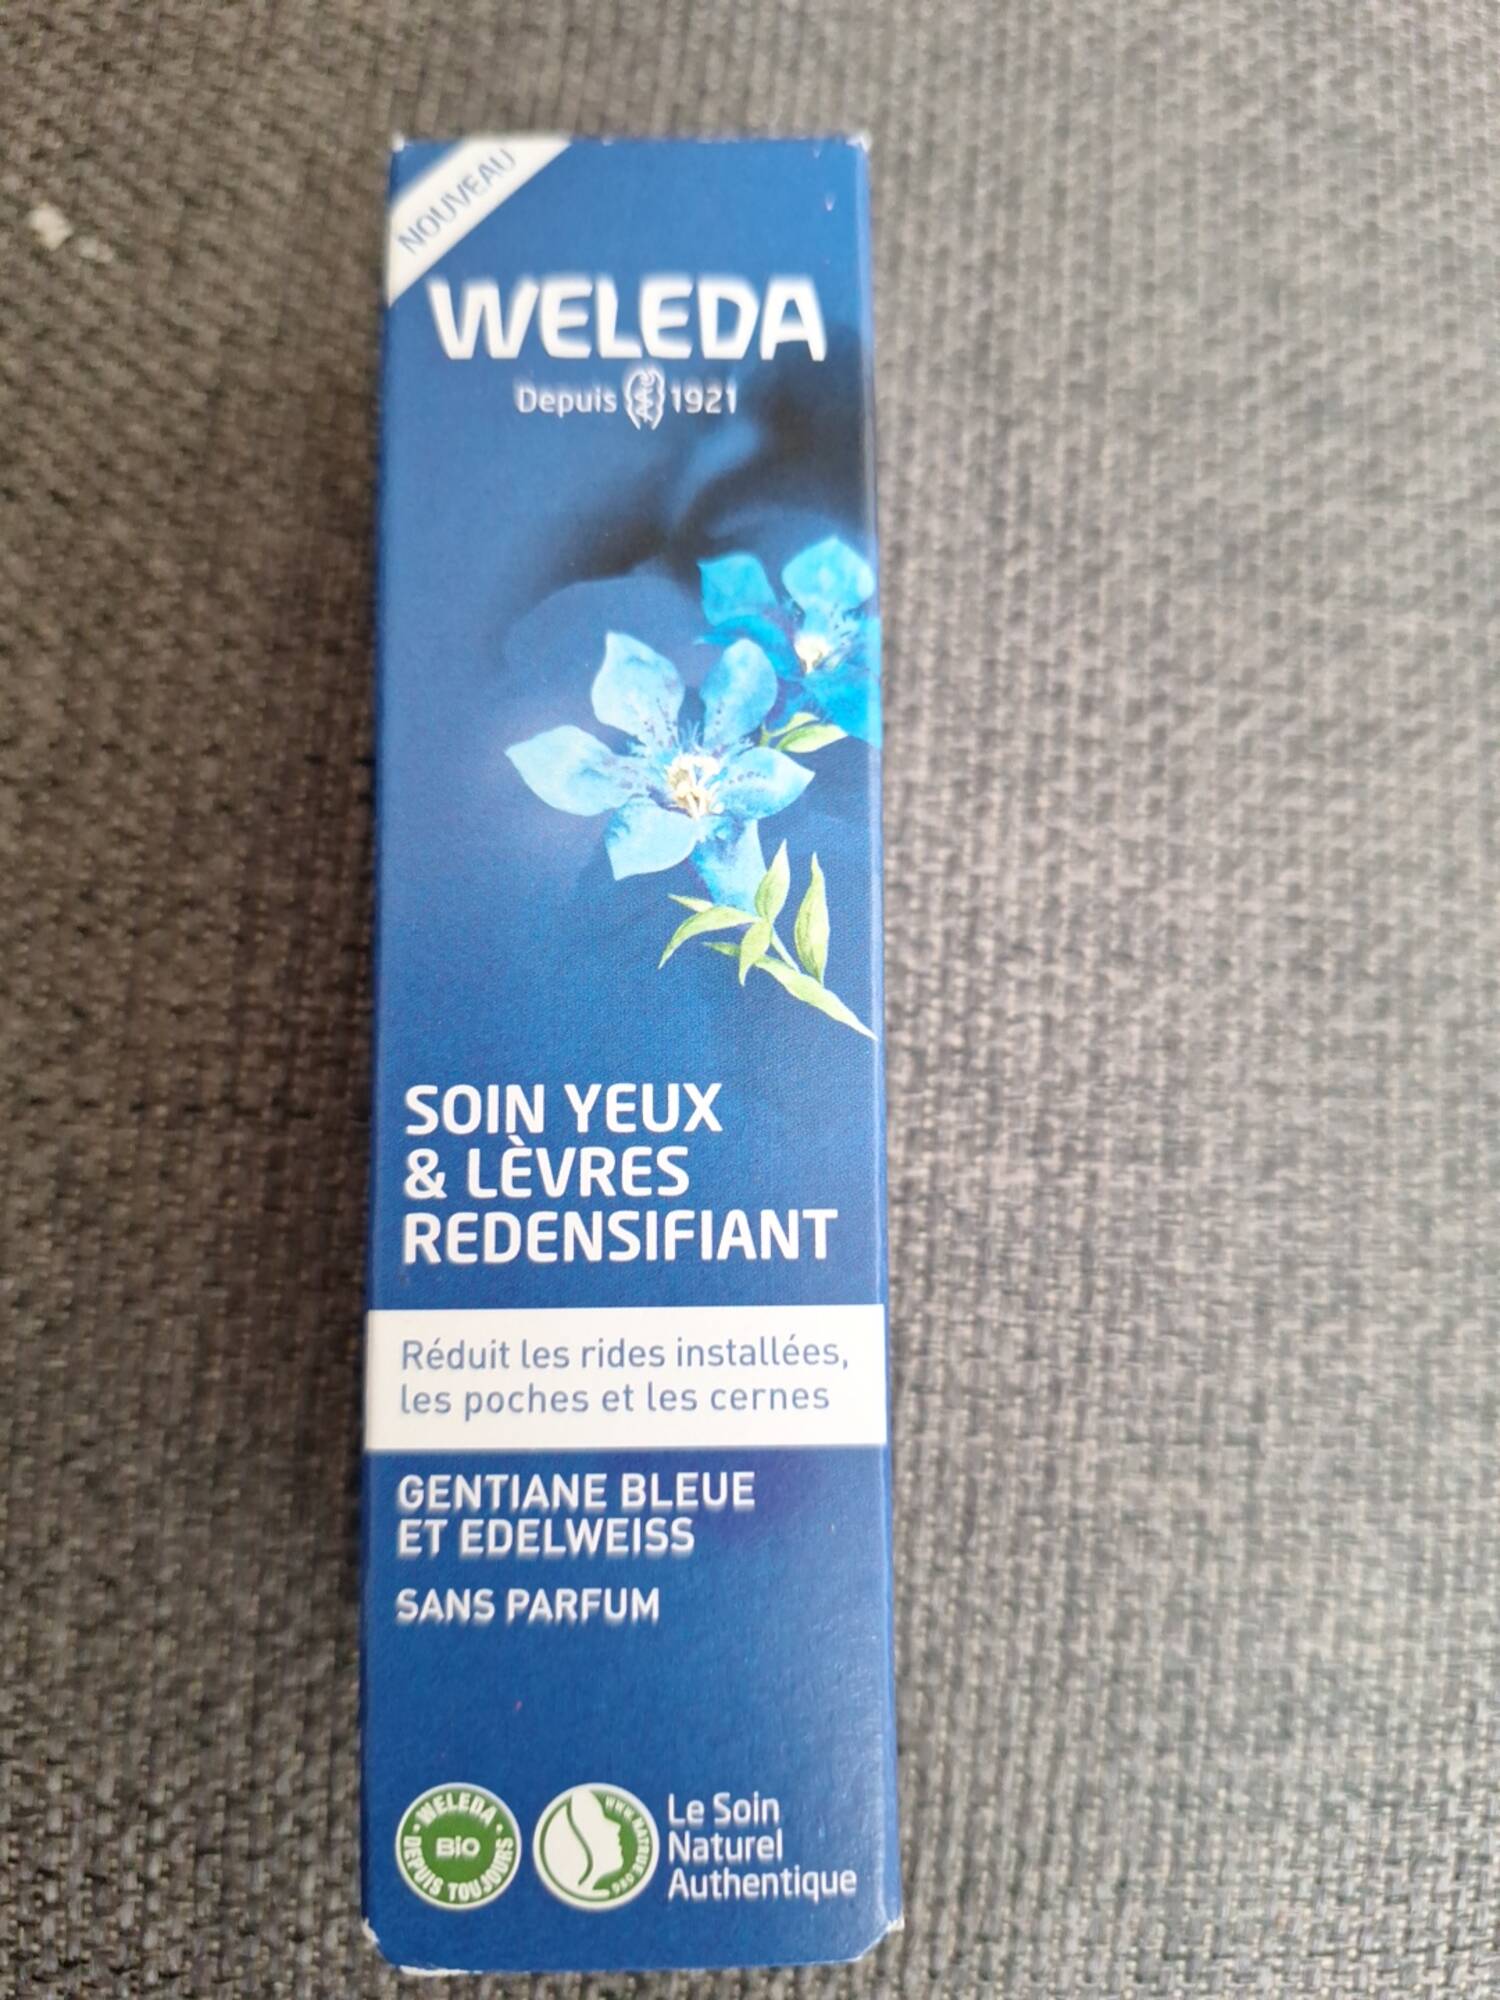 WELEDA - Soin yeux & lèvres redensifiant